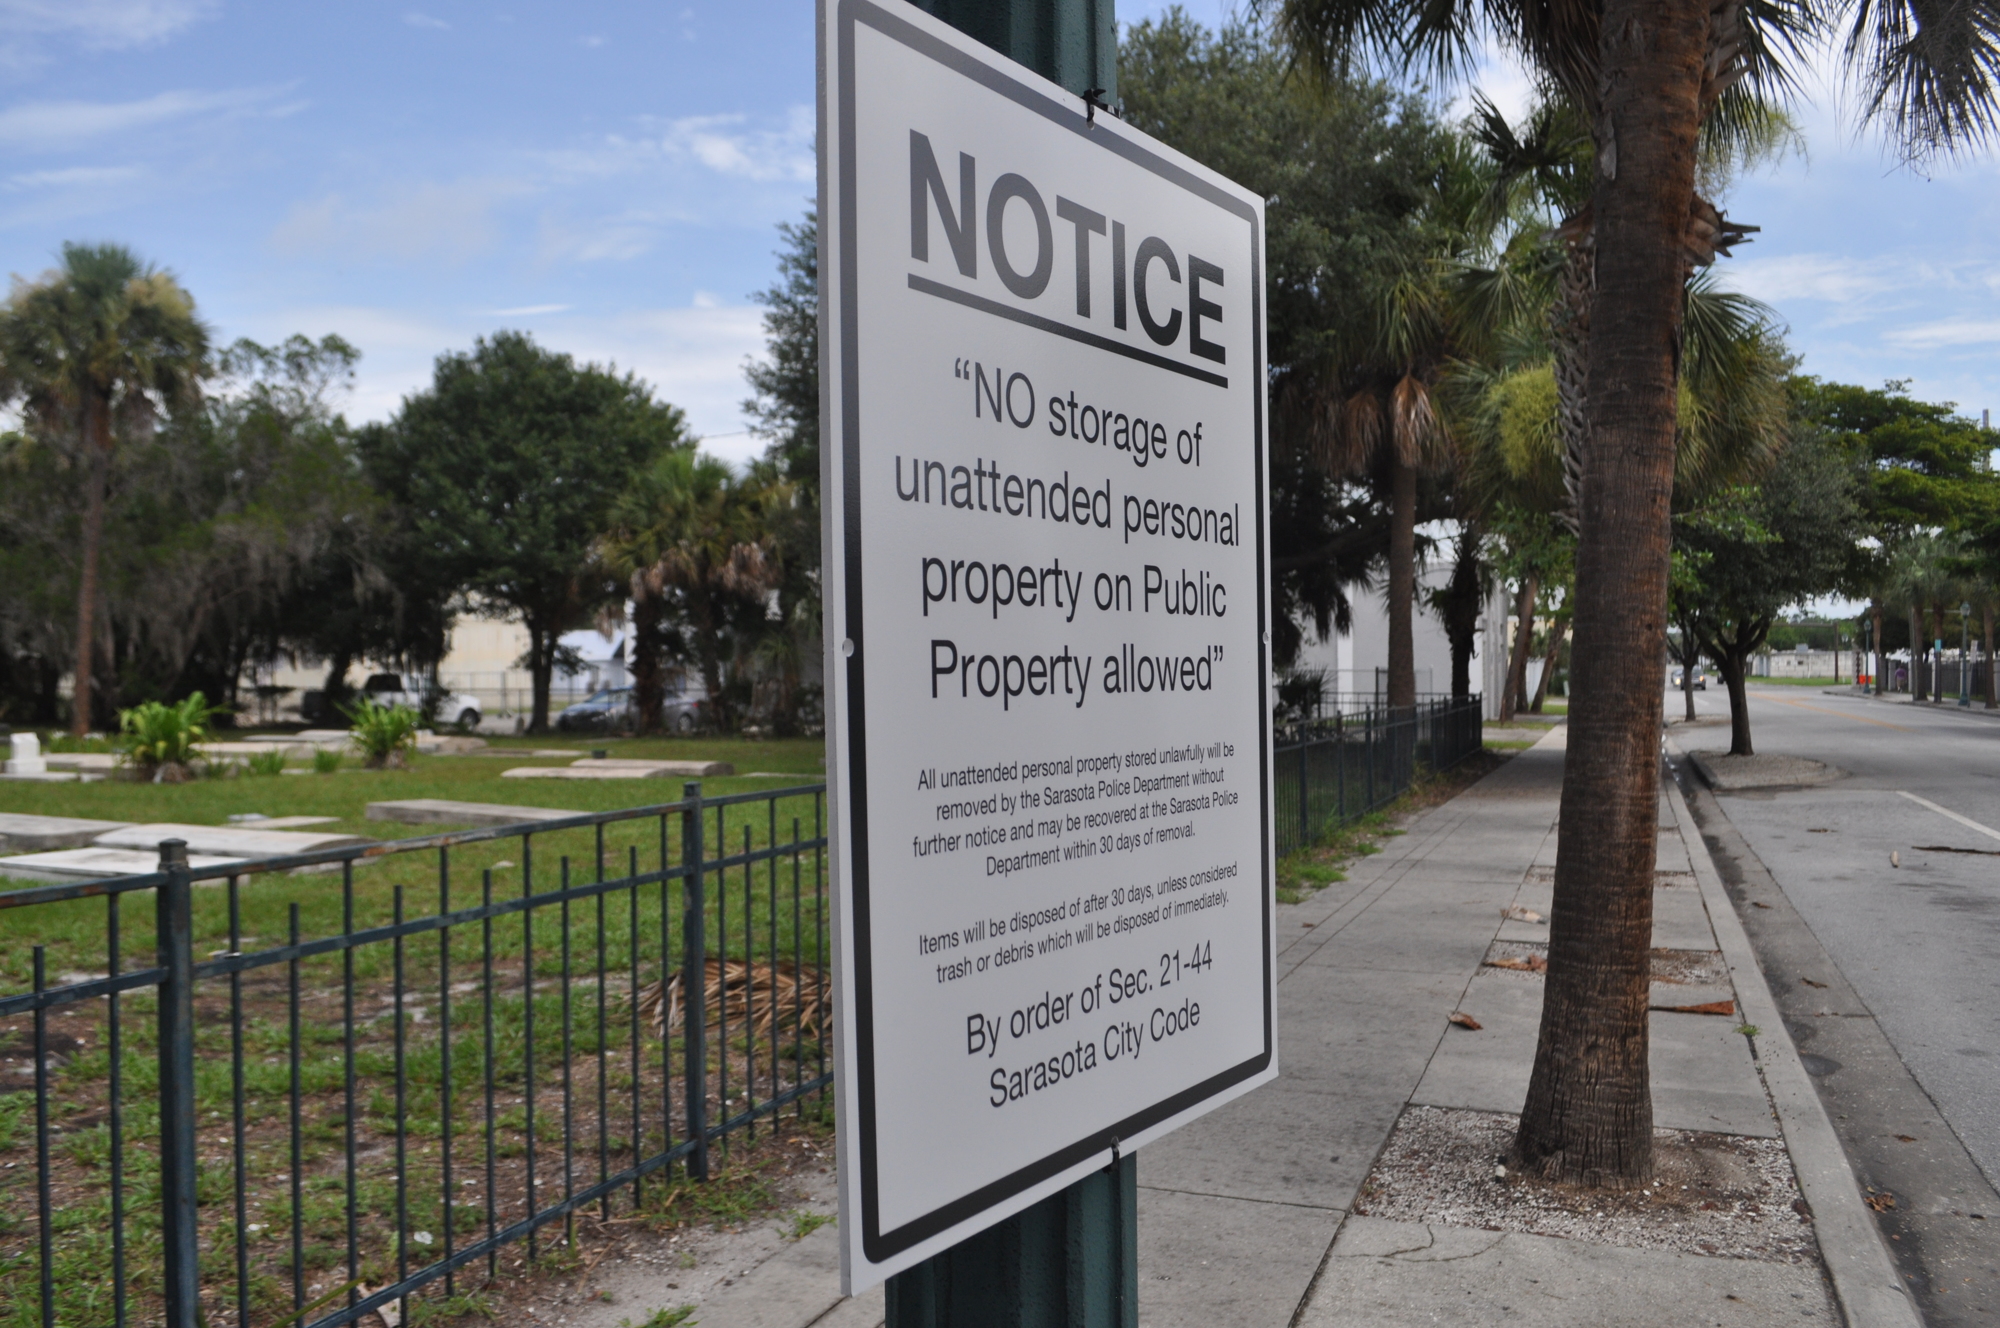 An ordinance restricting the storage of personal property on public land is one way the city has tried to address homeless complaints in the Rosemary District.